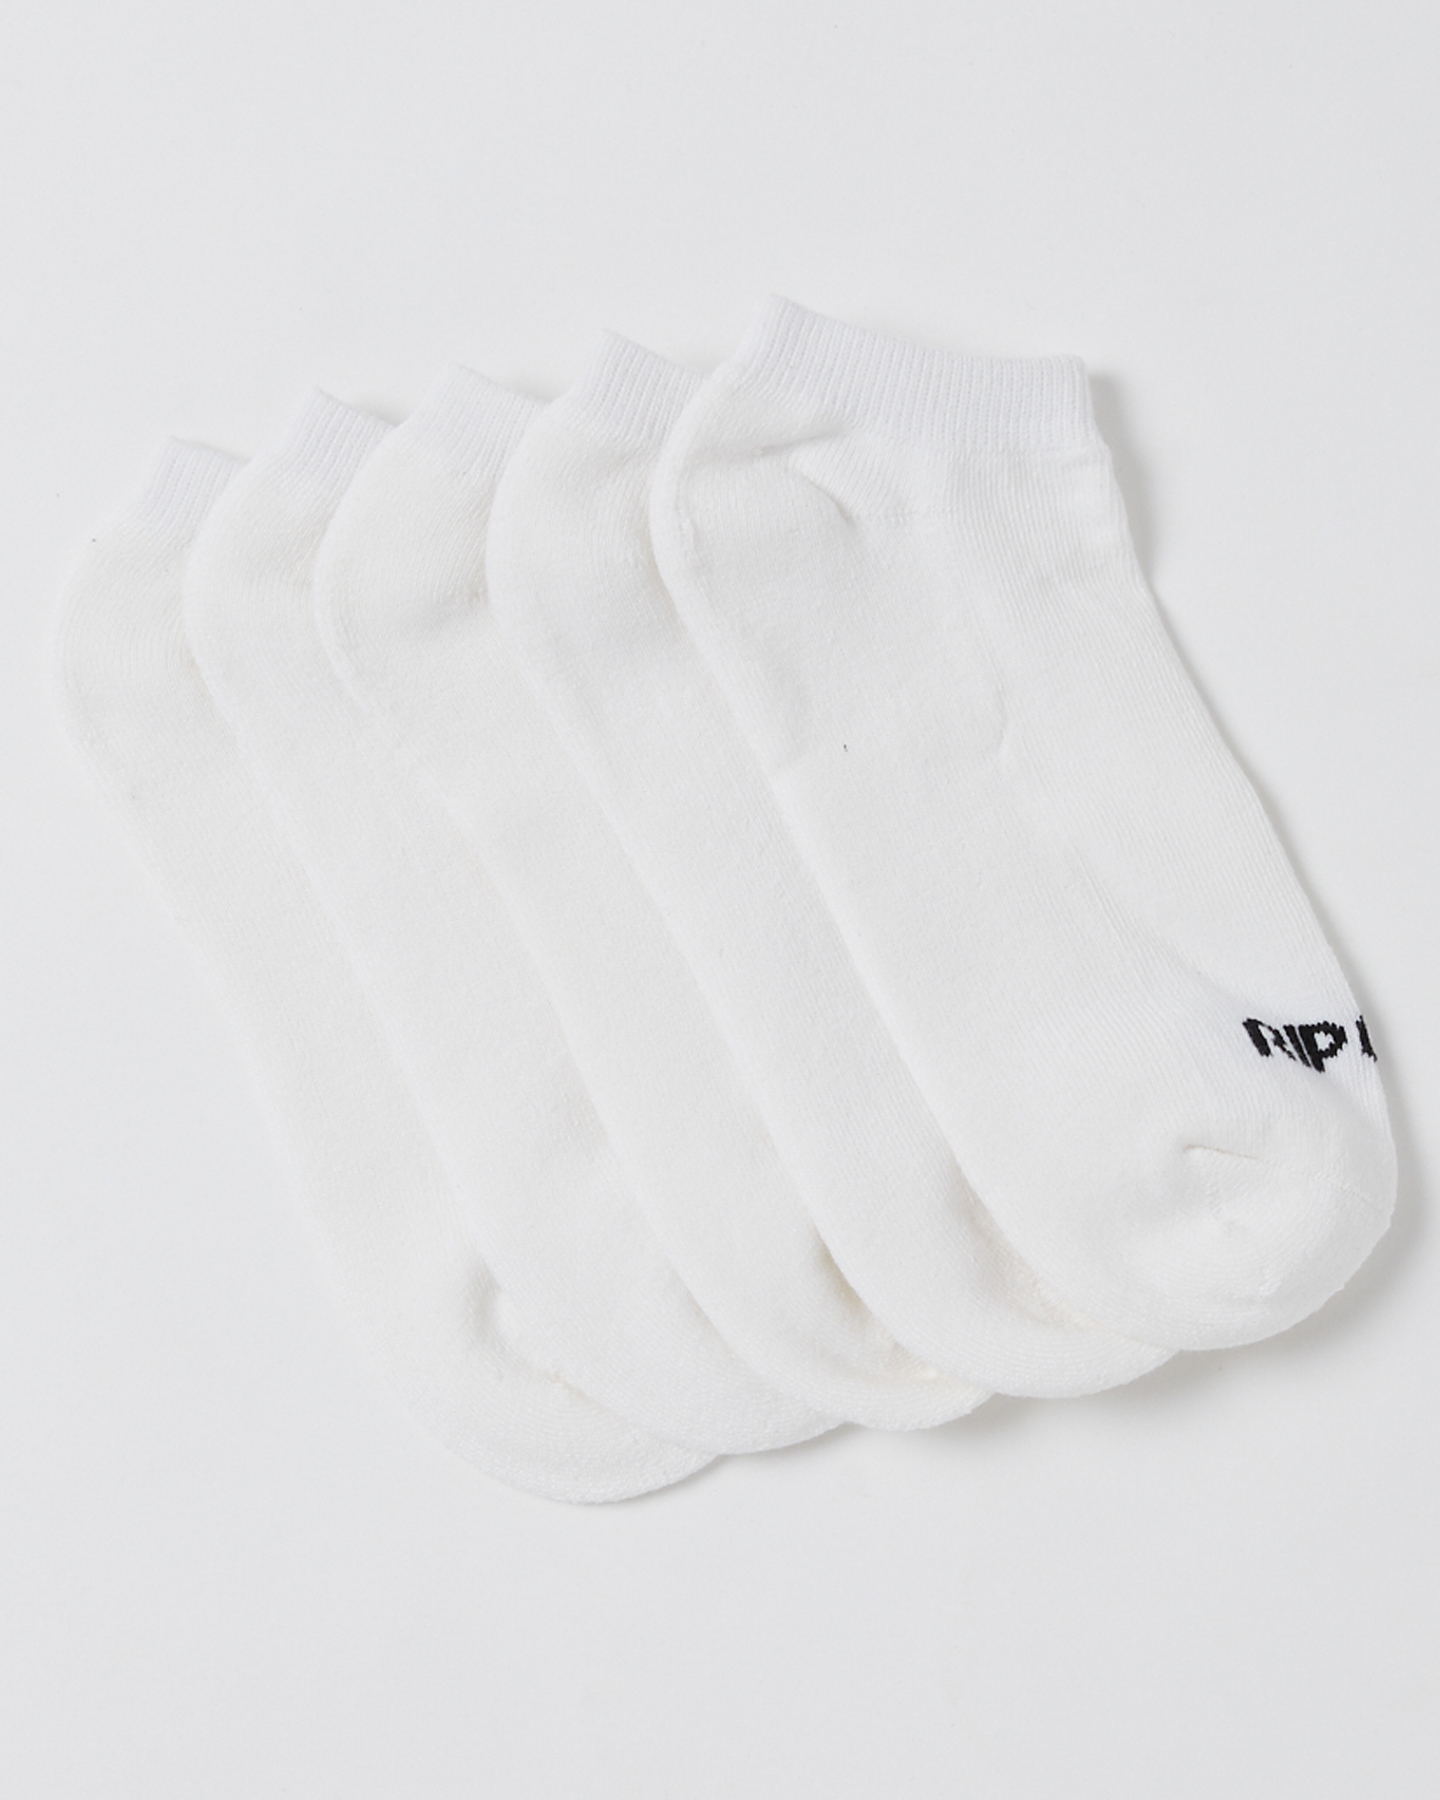 Rip Curl Ankle Sock 5-Pk - White | SurfStitch